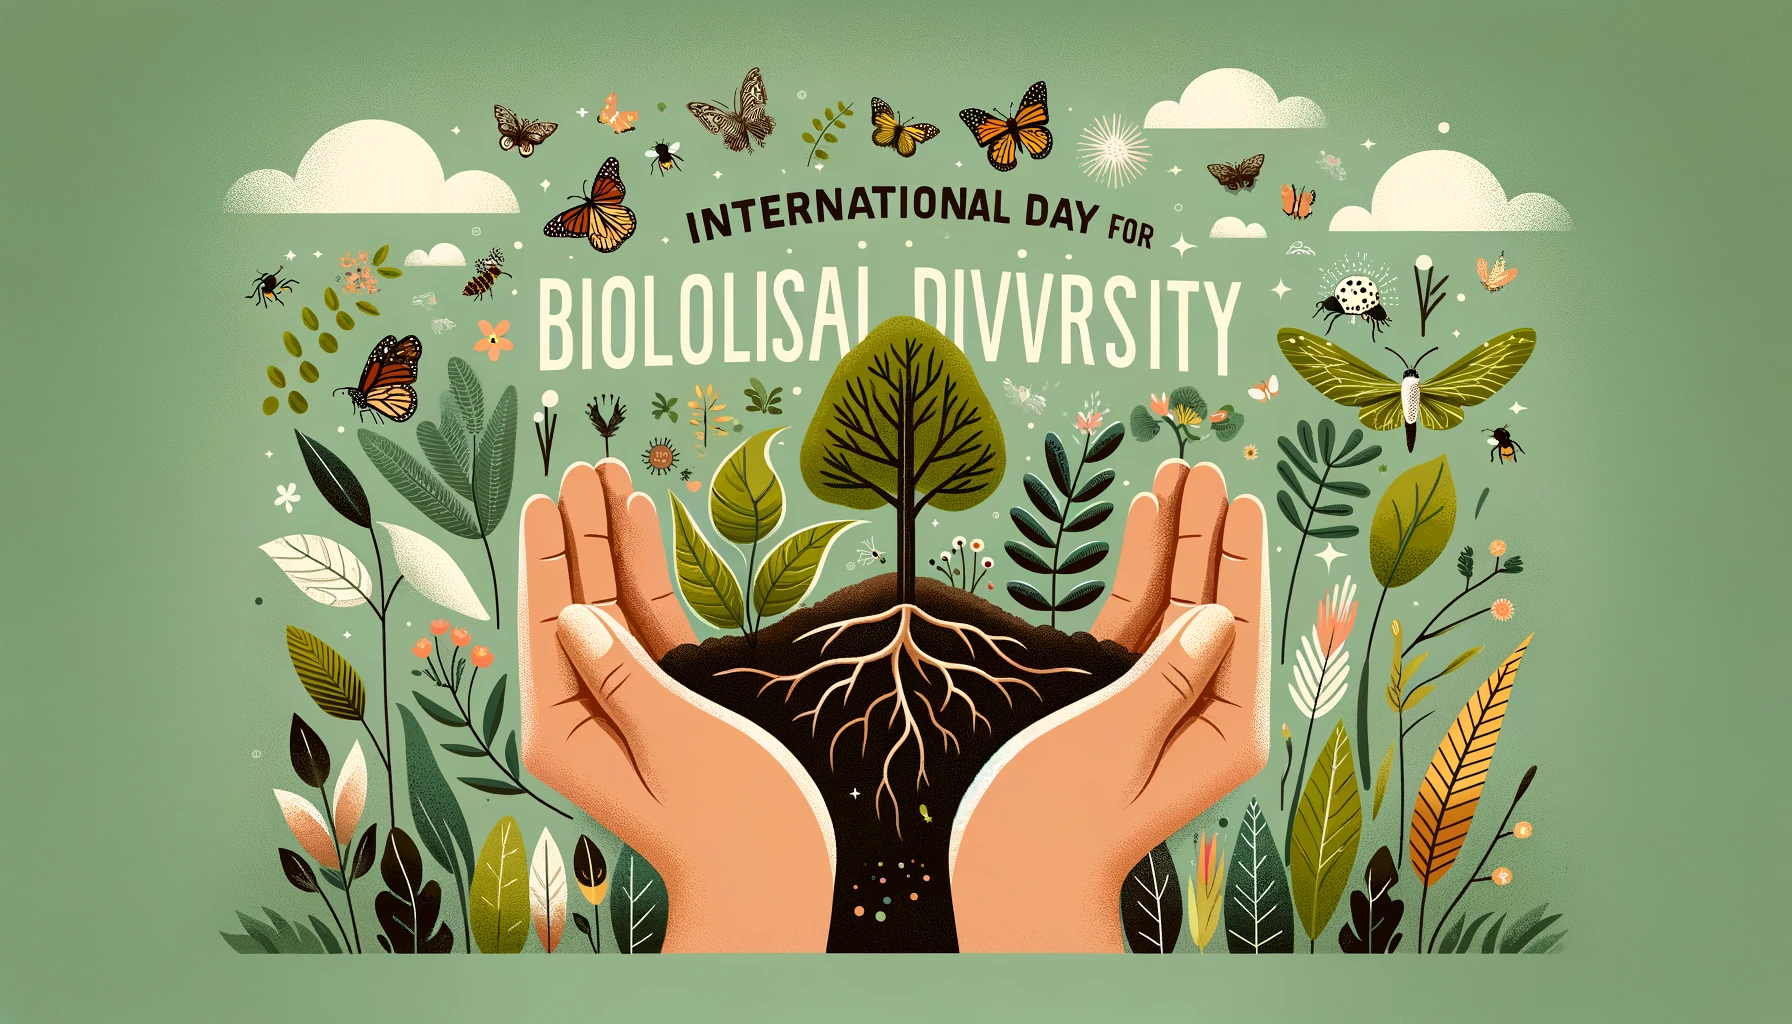 Deep Messages on Biodiversity Day